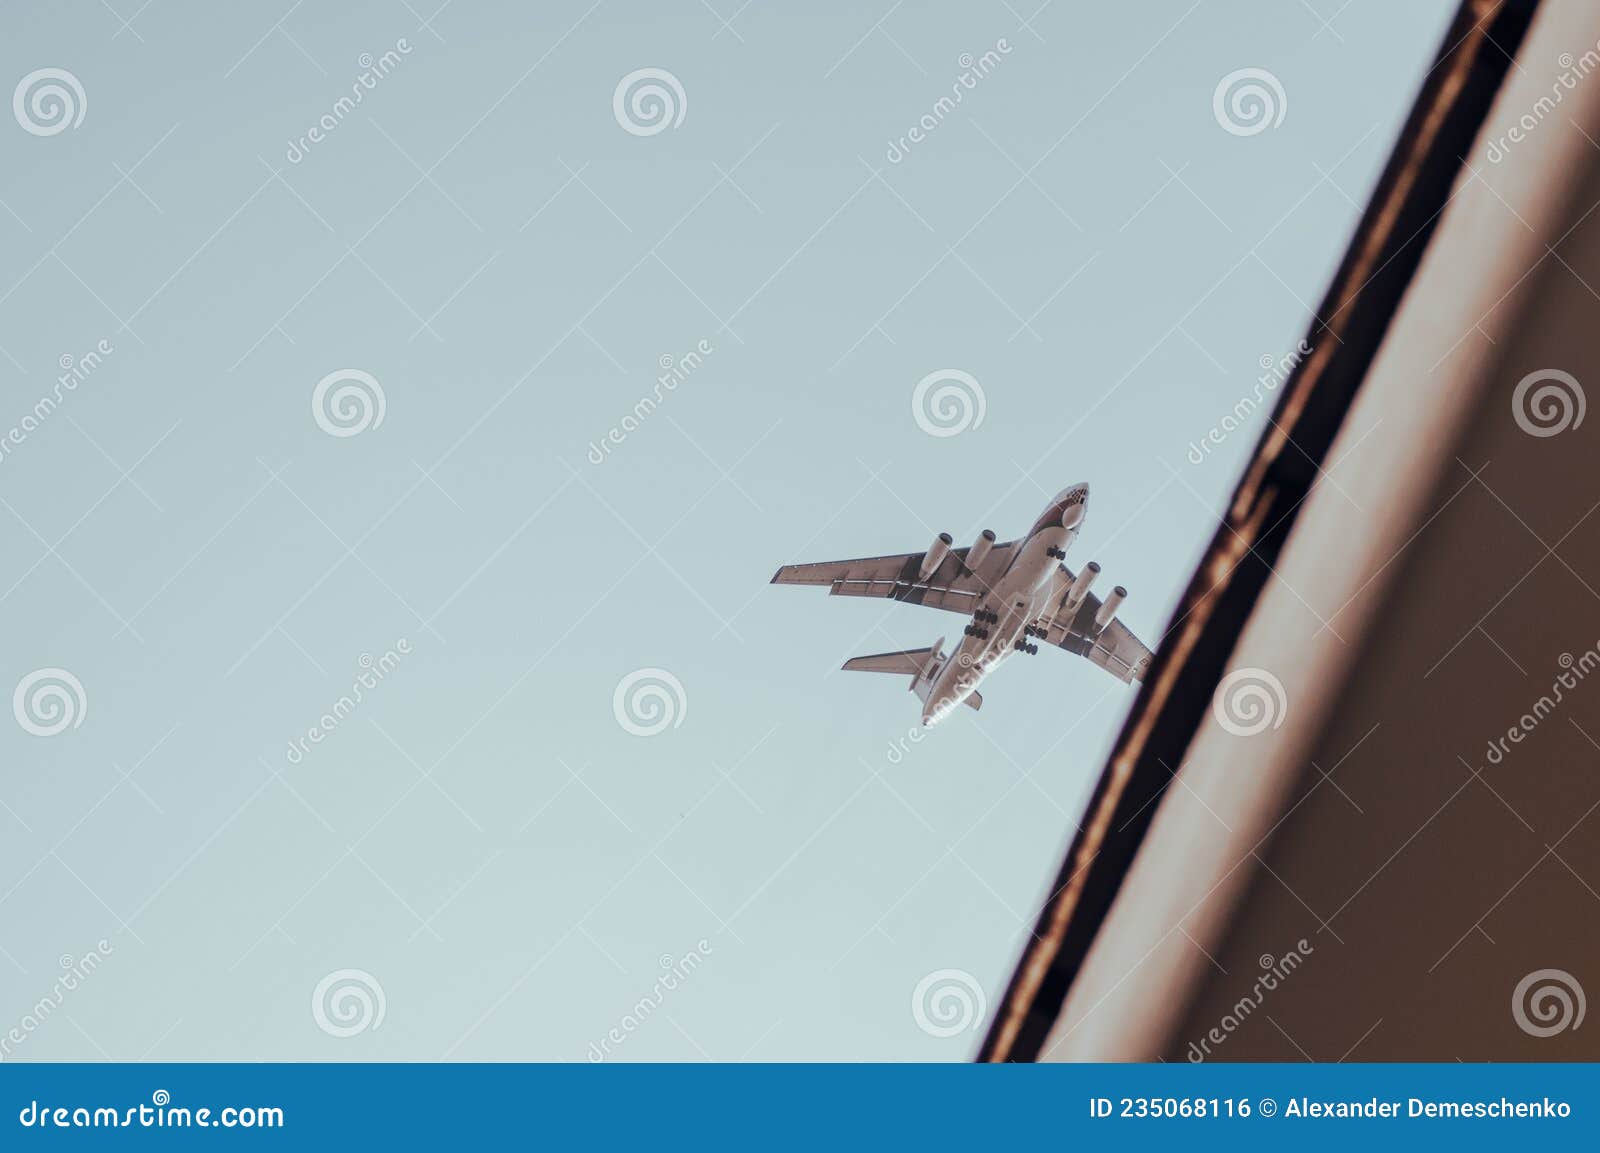 Airplane in the Sky. Airplane, Plane, Aircraft, Sky, Jet, Fly, Flight,  Stock Photo - Image of propeller, phone: 235068116